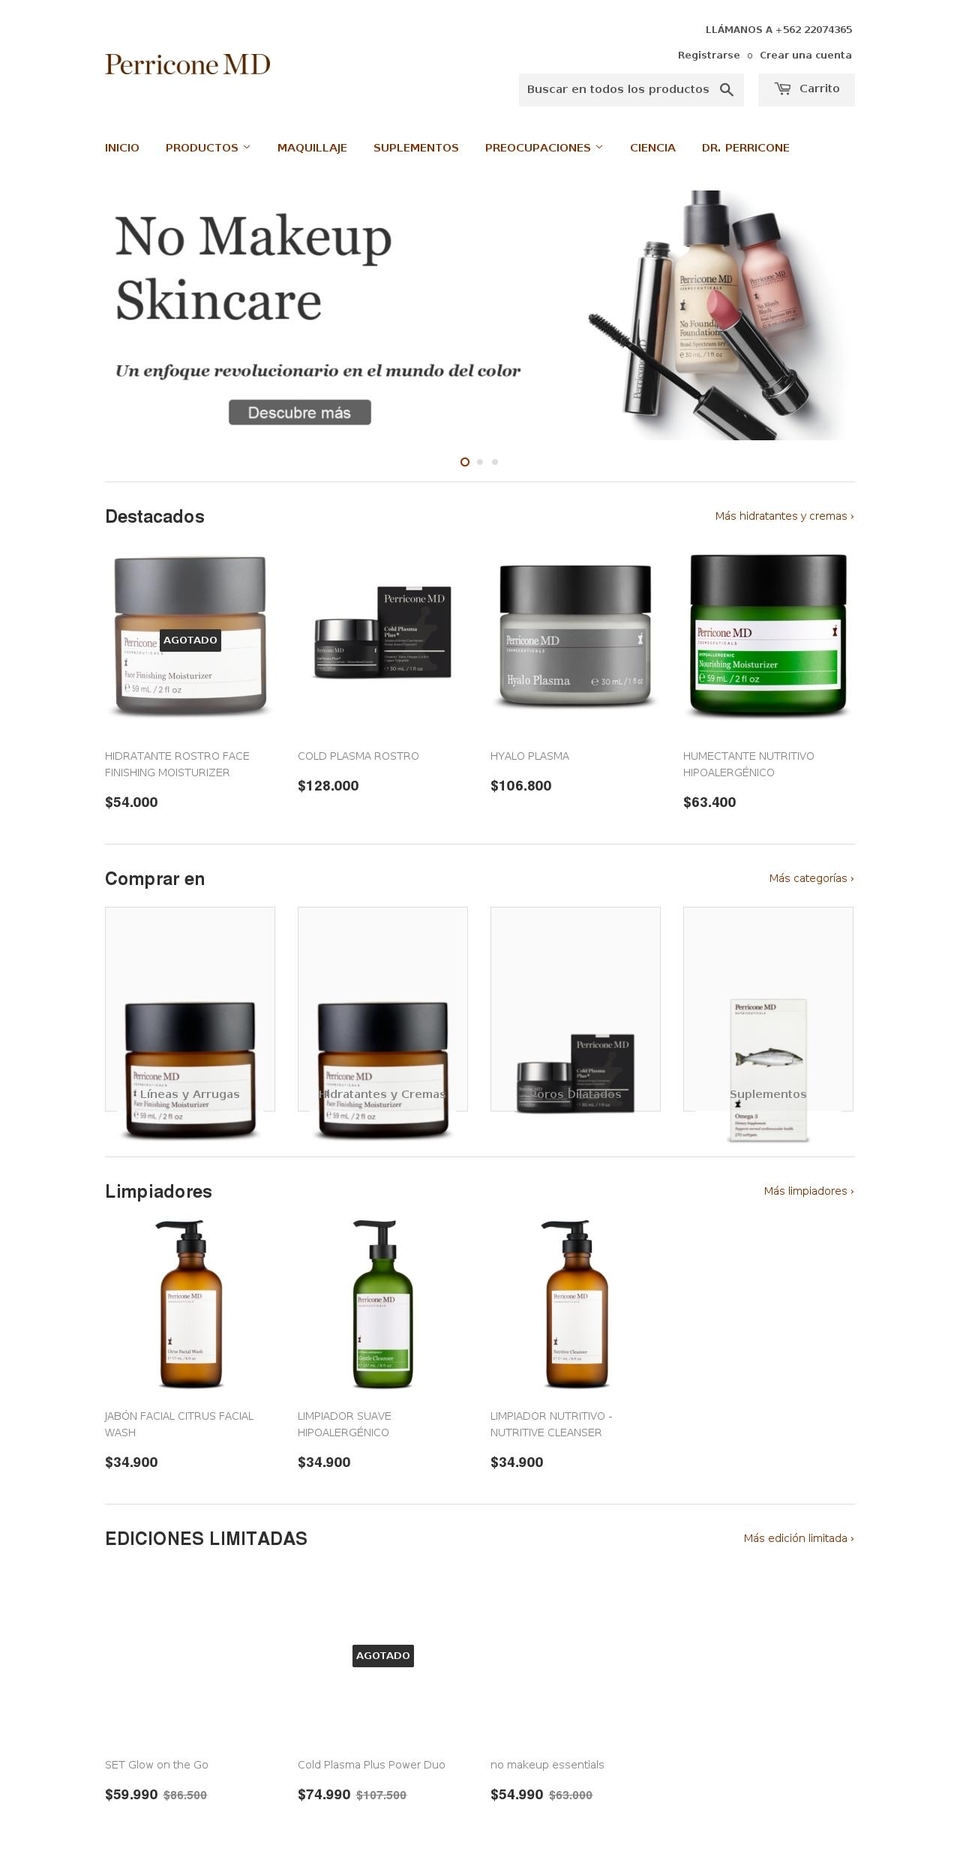 perriconechile.cl shopify website screenshot